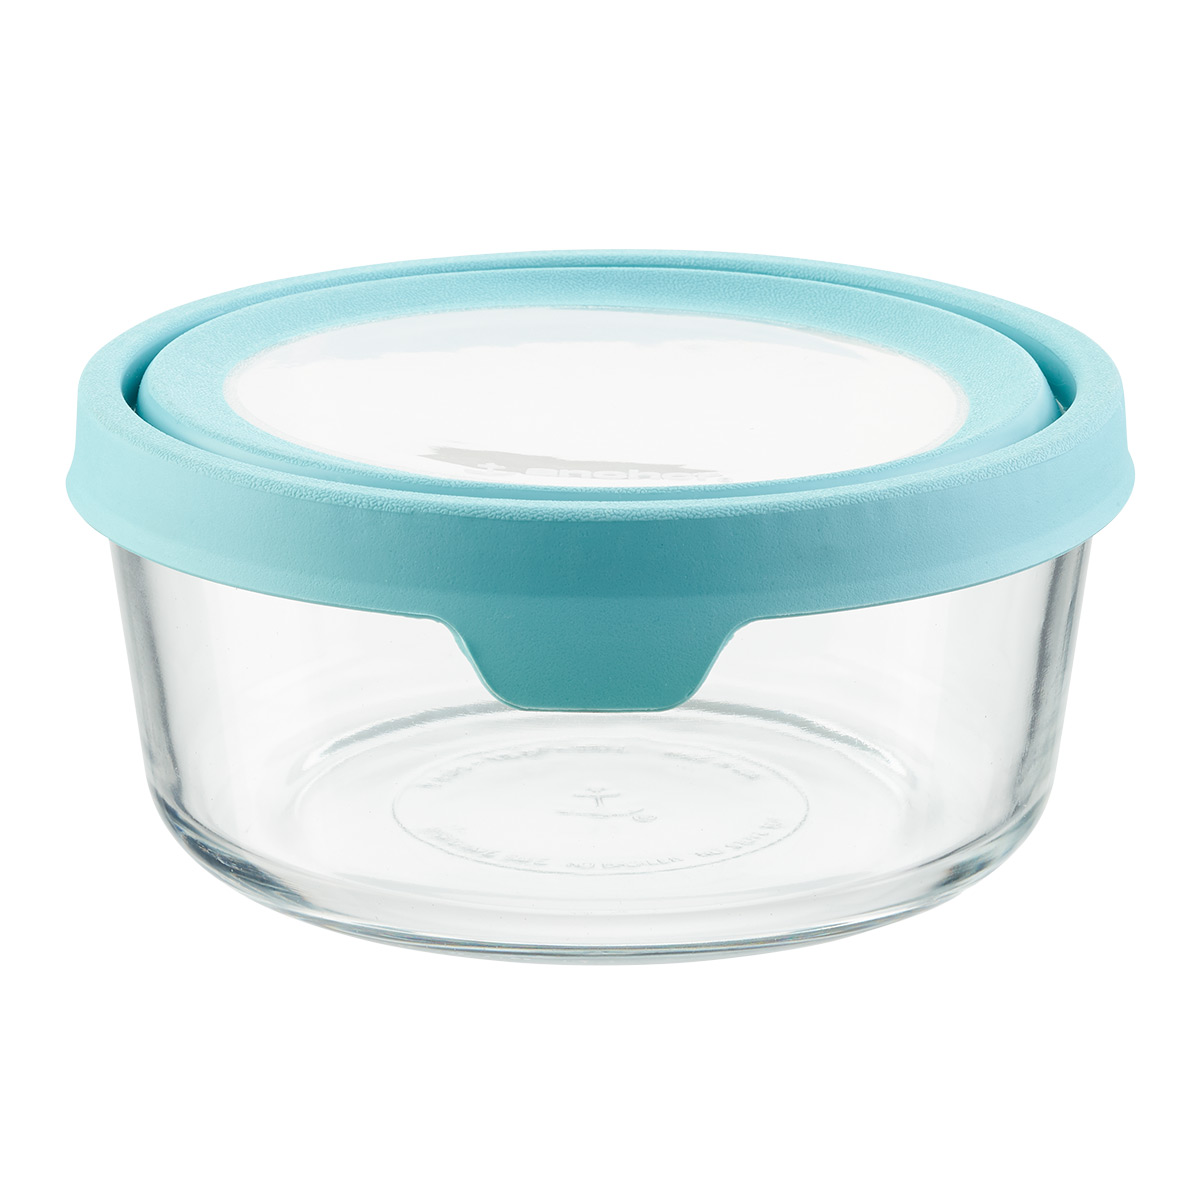 https://www.containerstore.com/catalogimages/351267/10076230-anchor-trueseal-container-r.jpg